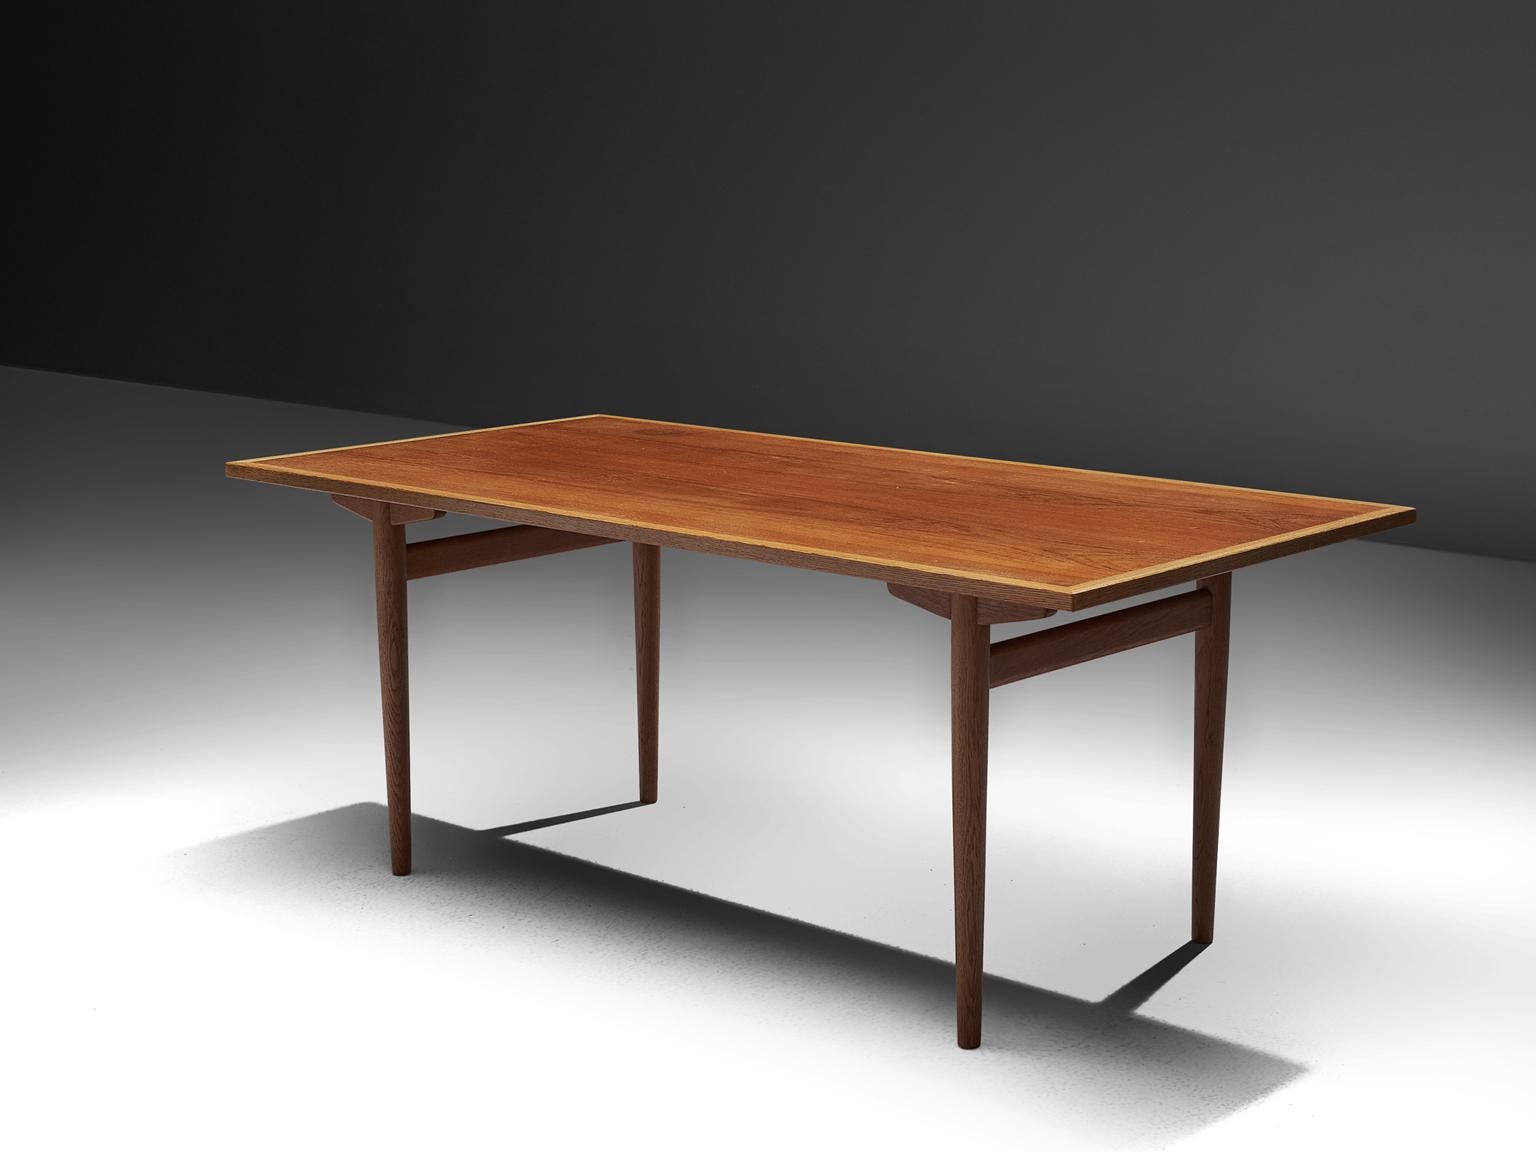 Hans J. Wegner for Andreas Tuck, dining table, teak, oak, Denmark, 1955. 

Dining table with straight tapered legs, by the Danish Designer Hans Wegner. This table is considered as an iconic architectural design by Wegner as he experimented in this